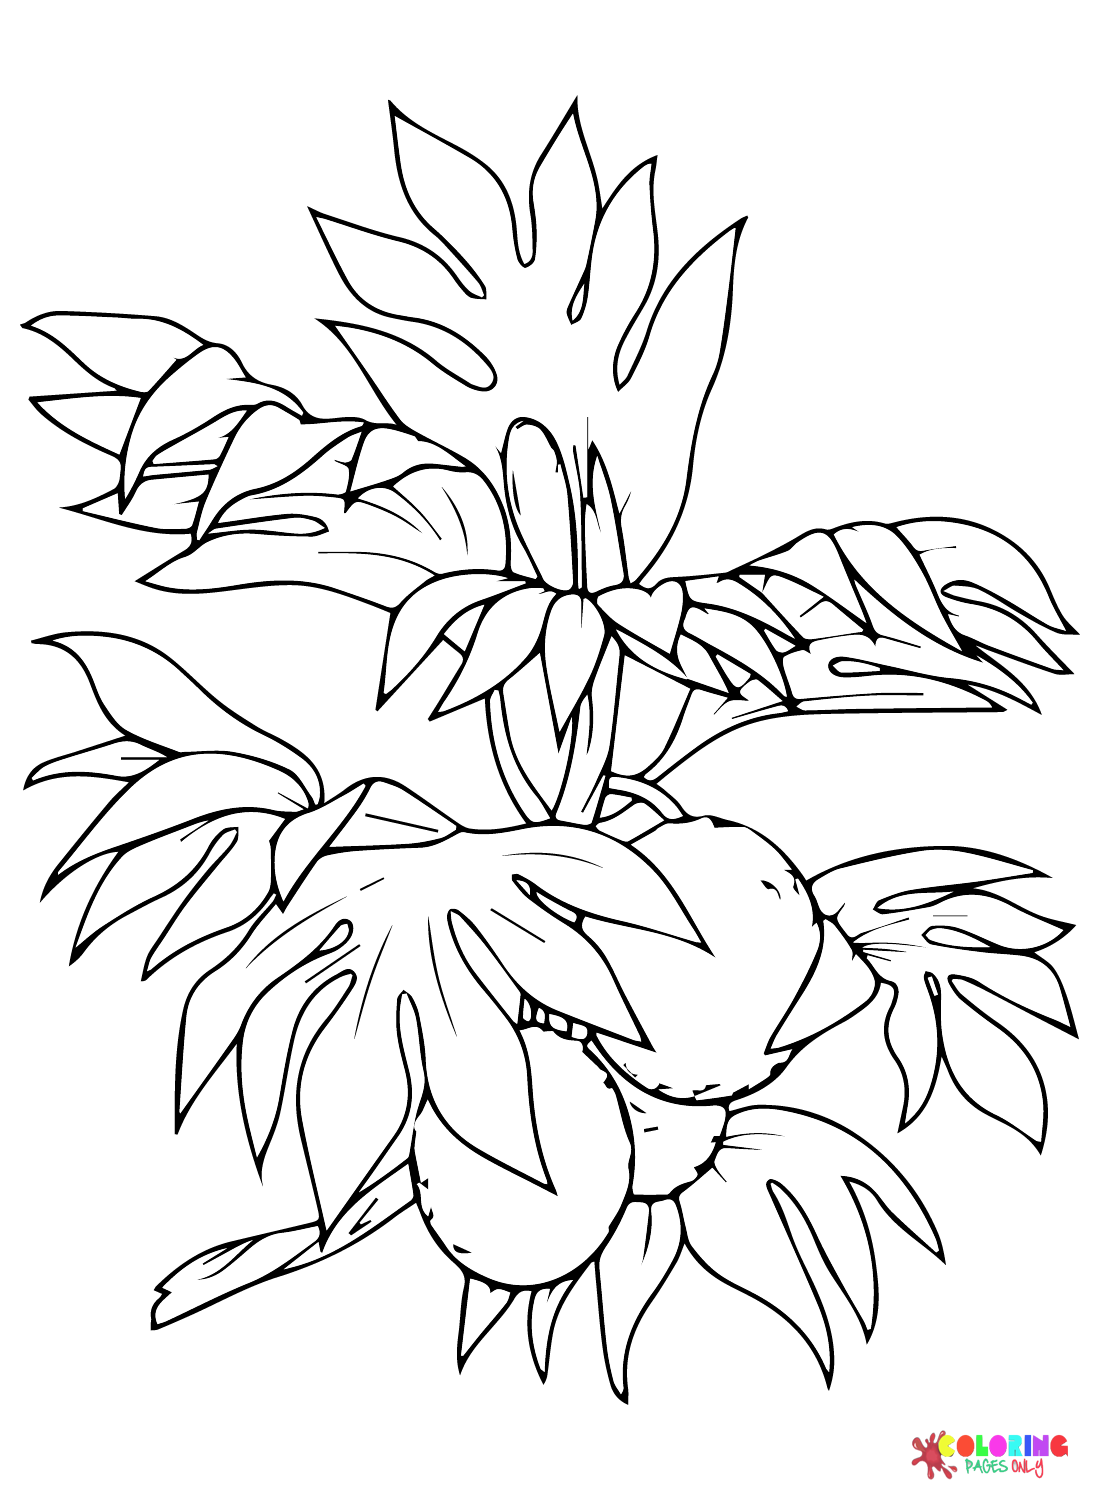 Breadfruit Images Coloring Page